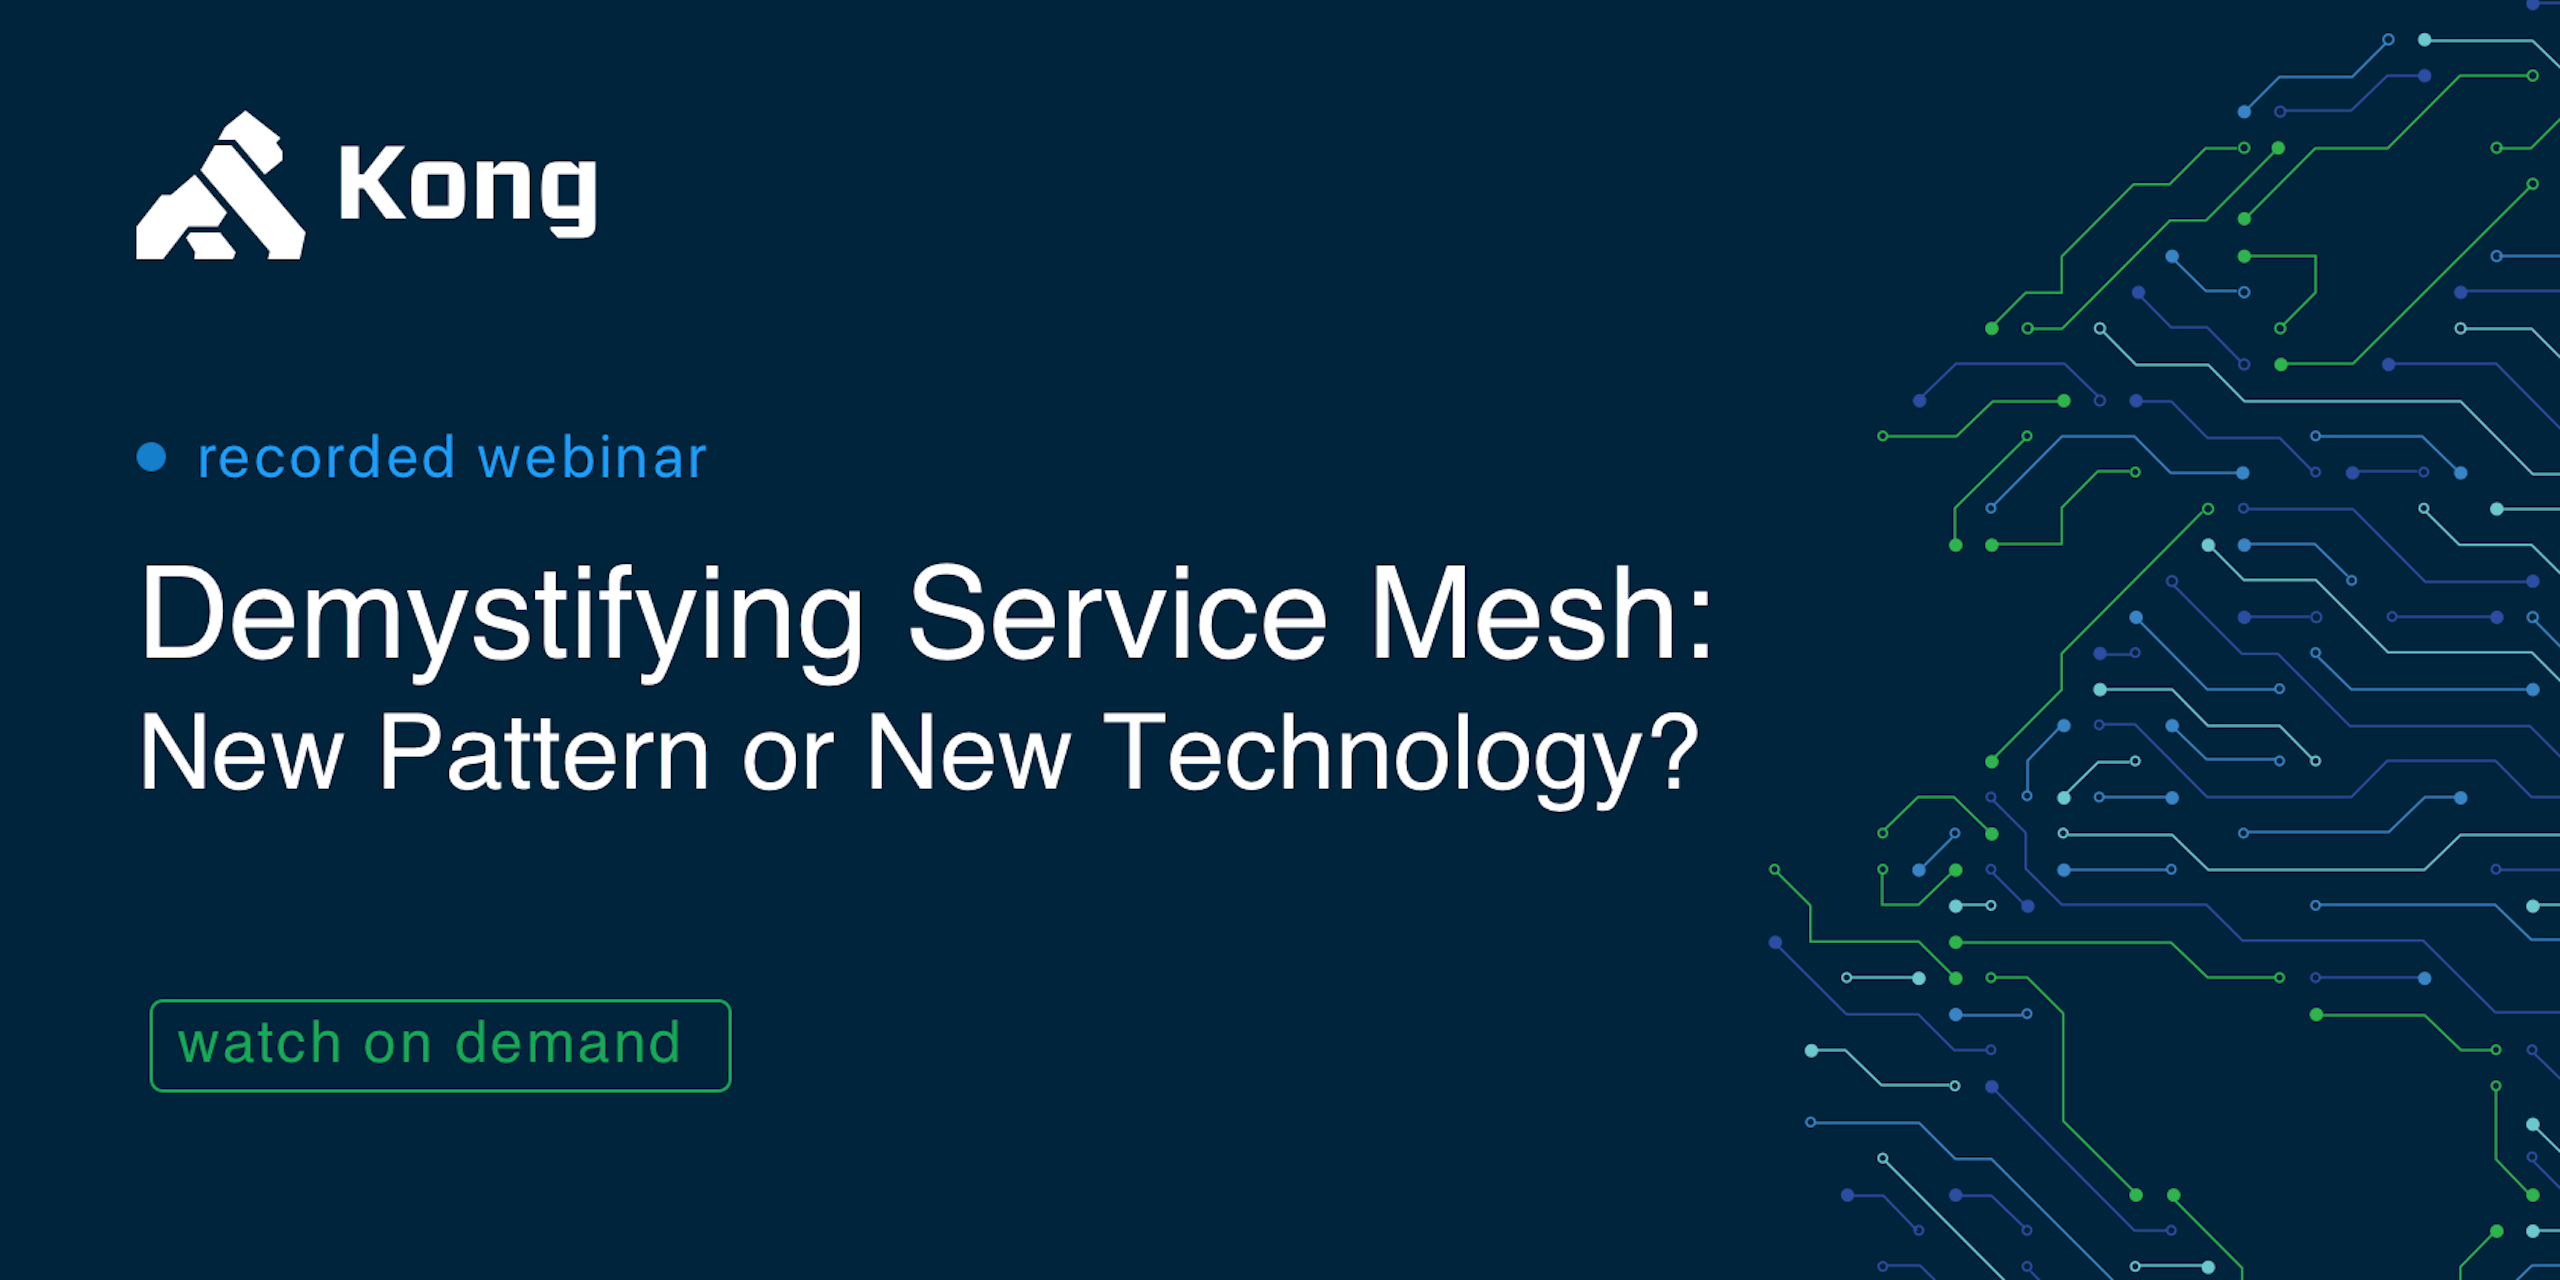 Demystifying Service Mesh: New Pattern or New Technology?